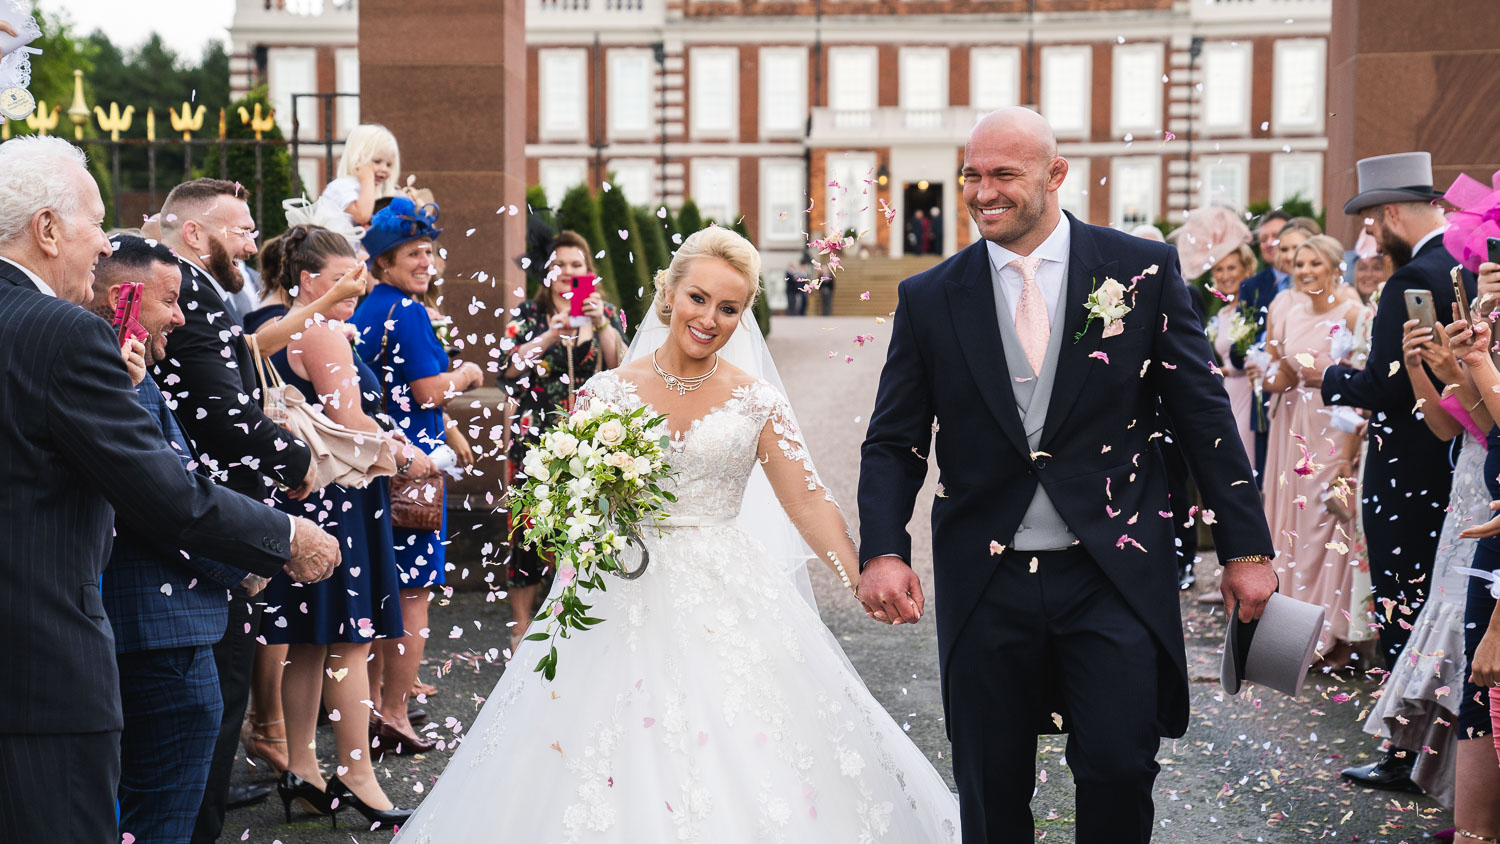 Confetti throwing over the couple at a knowsley hall wedding